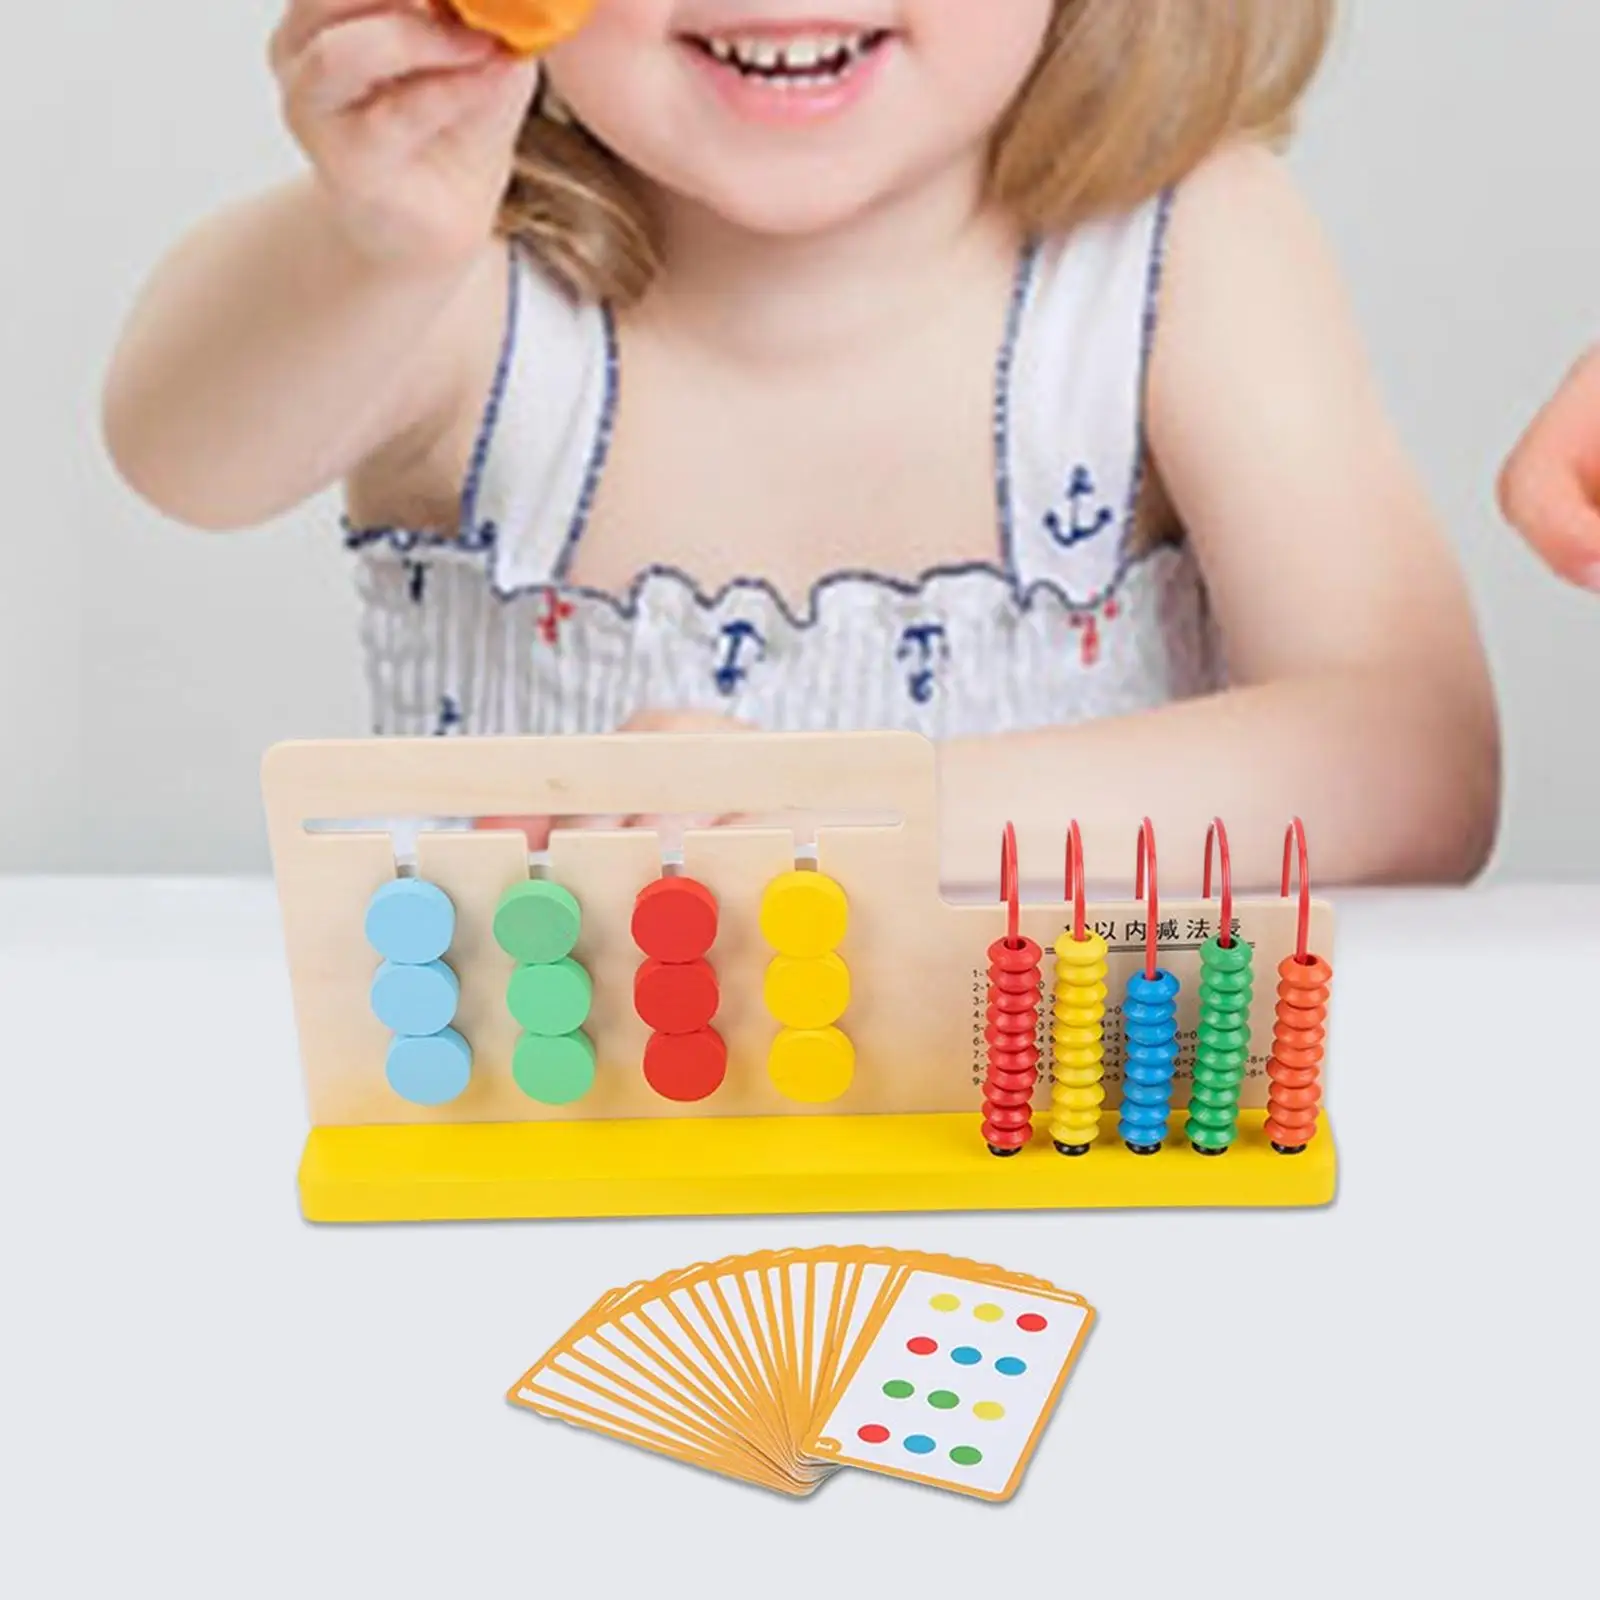 Sliding Puzzle Colorful Bead Frame Abacus Brain Teasers Memory Game Counting Numbers Wooden Toys Gifts Preschool Ages 3+ Toddler